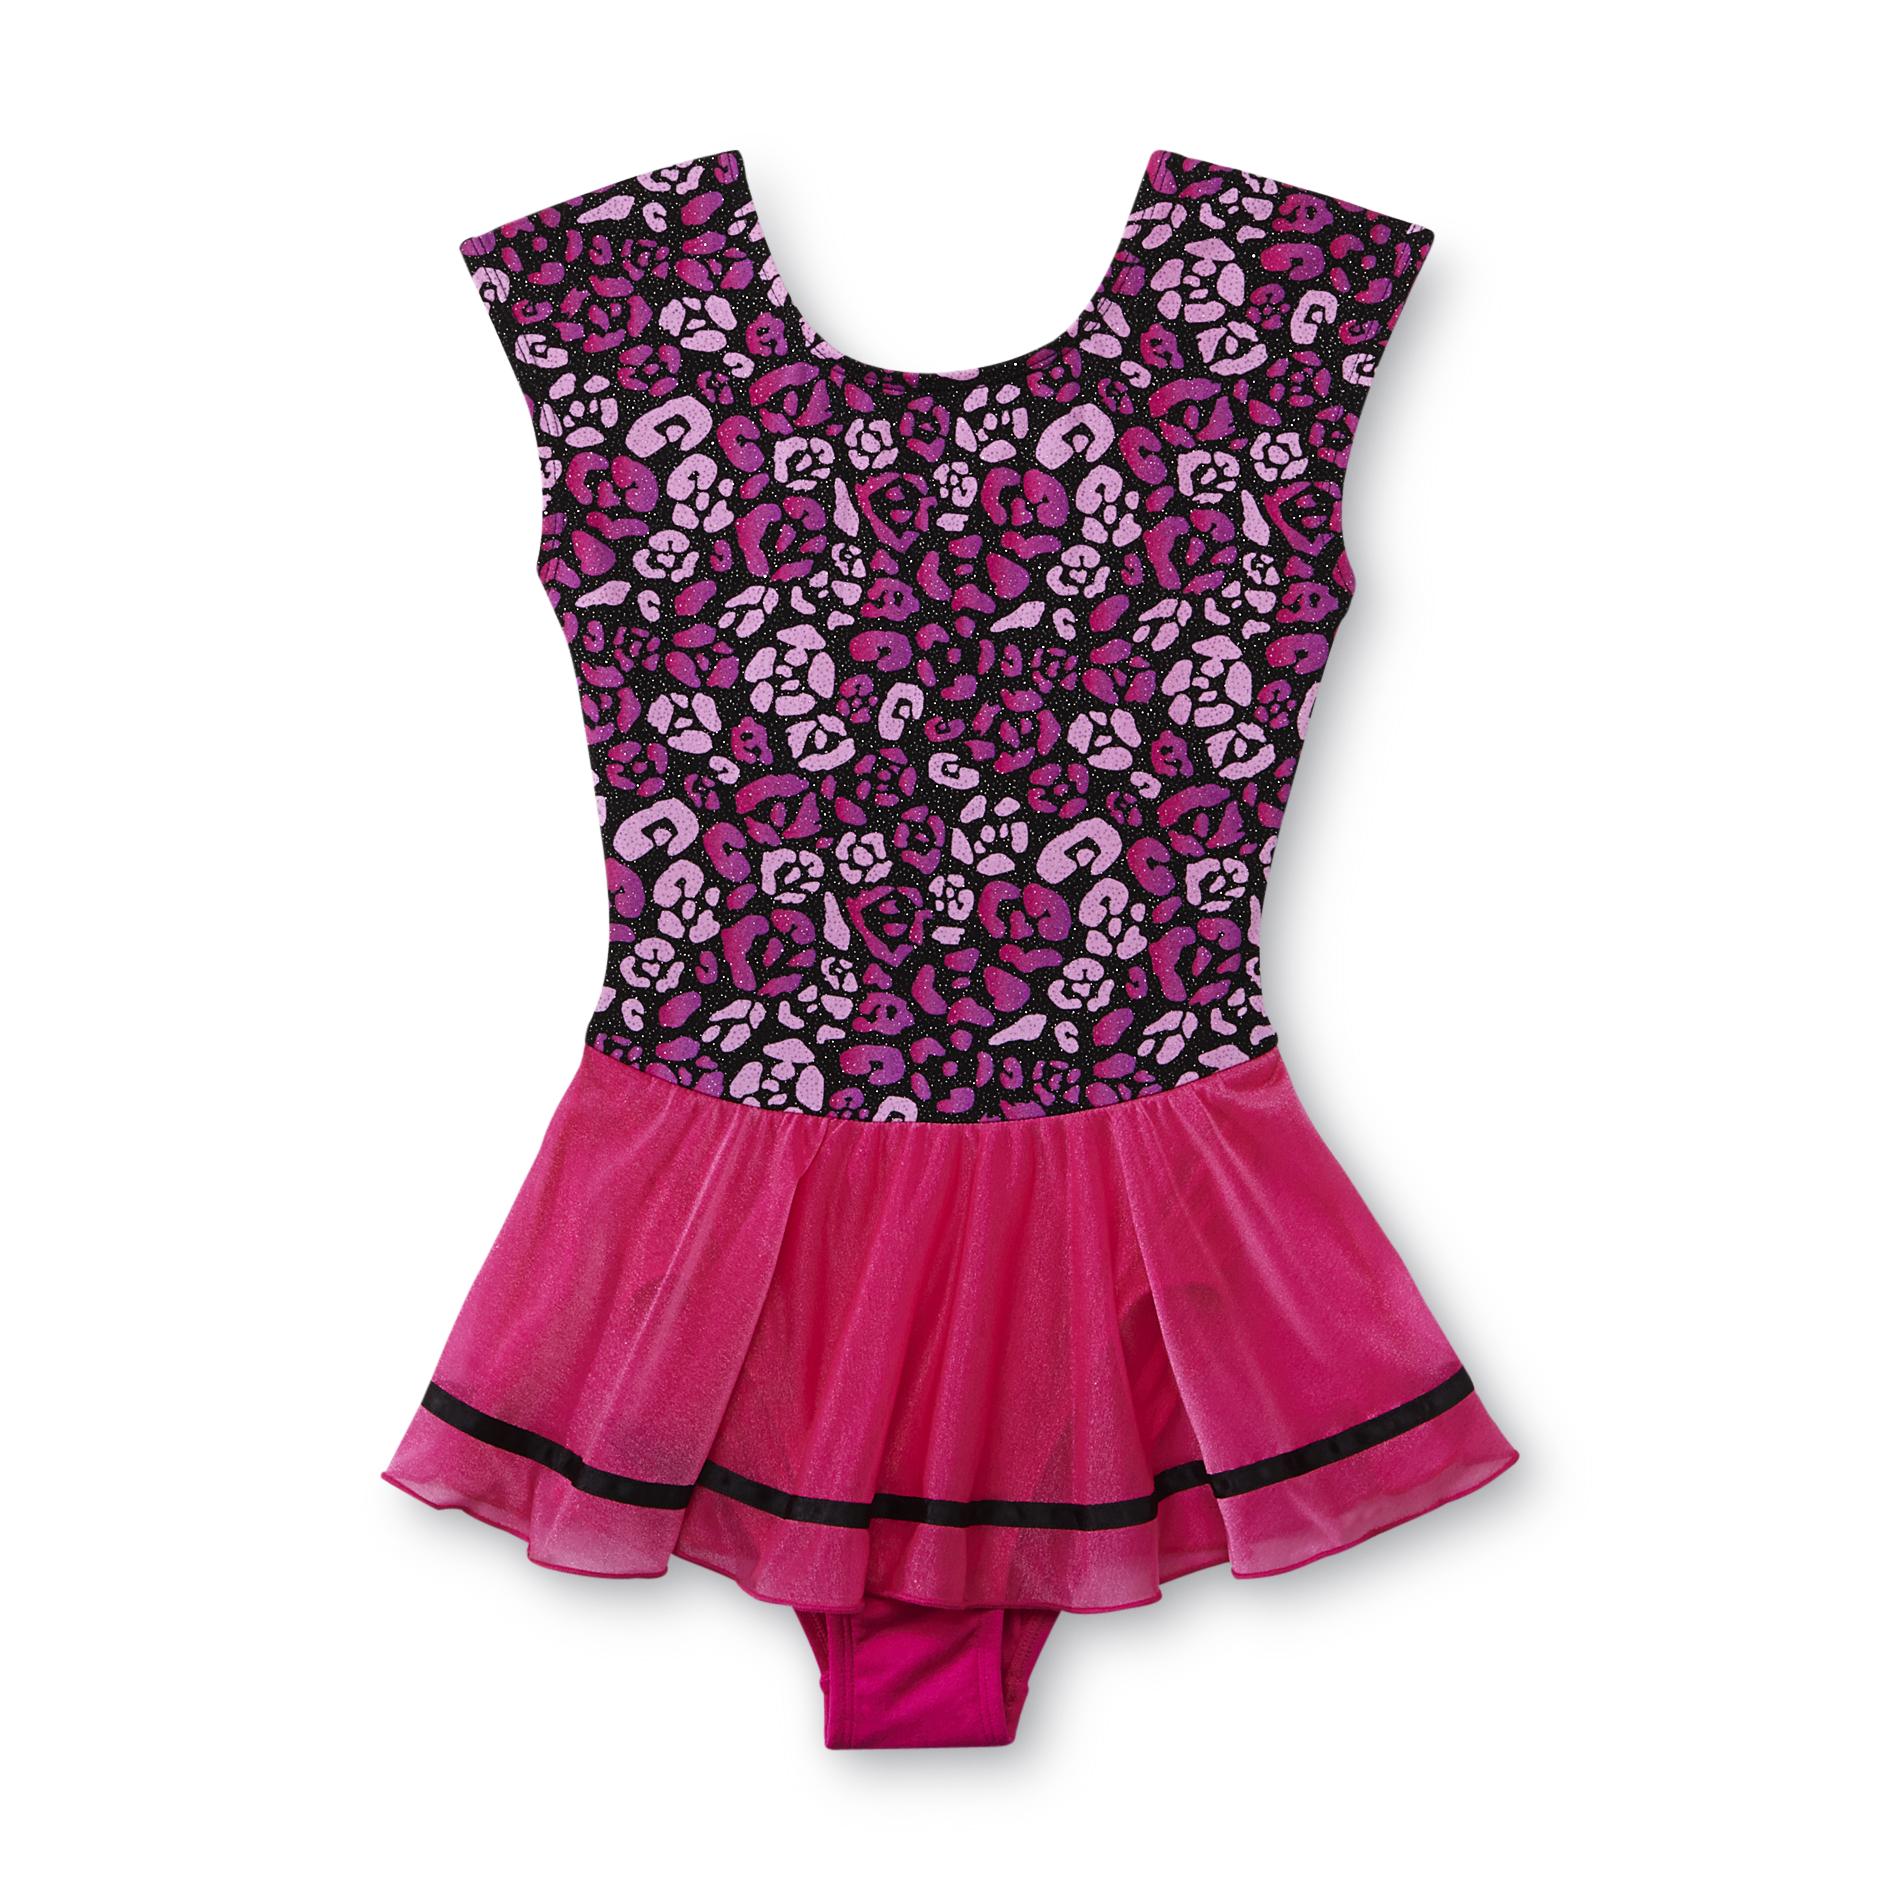 Just Imagine Girl's Skirted Leotard - Abstract Floral